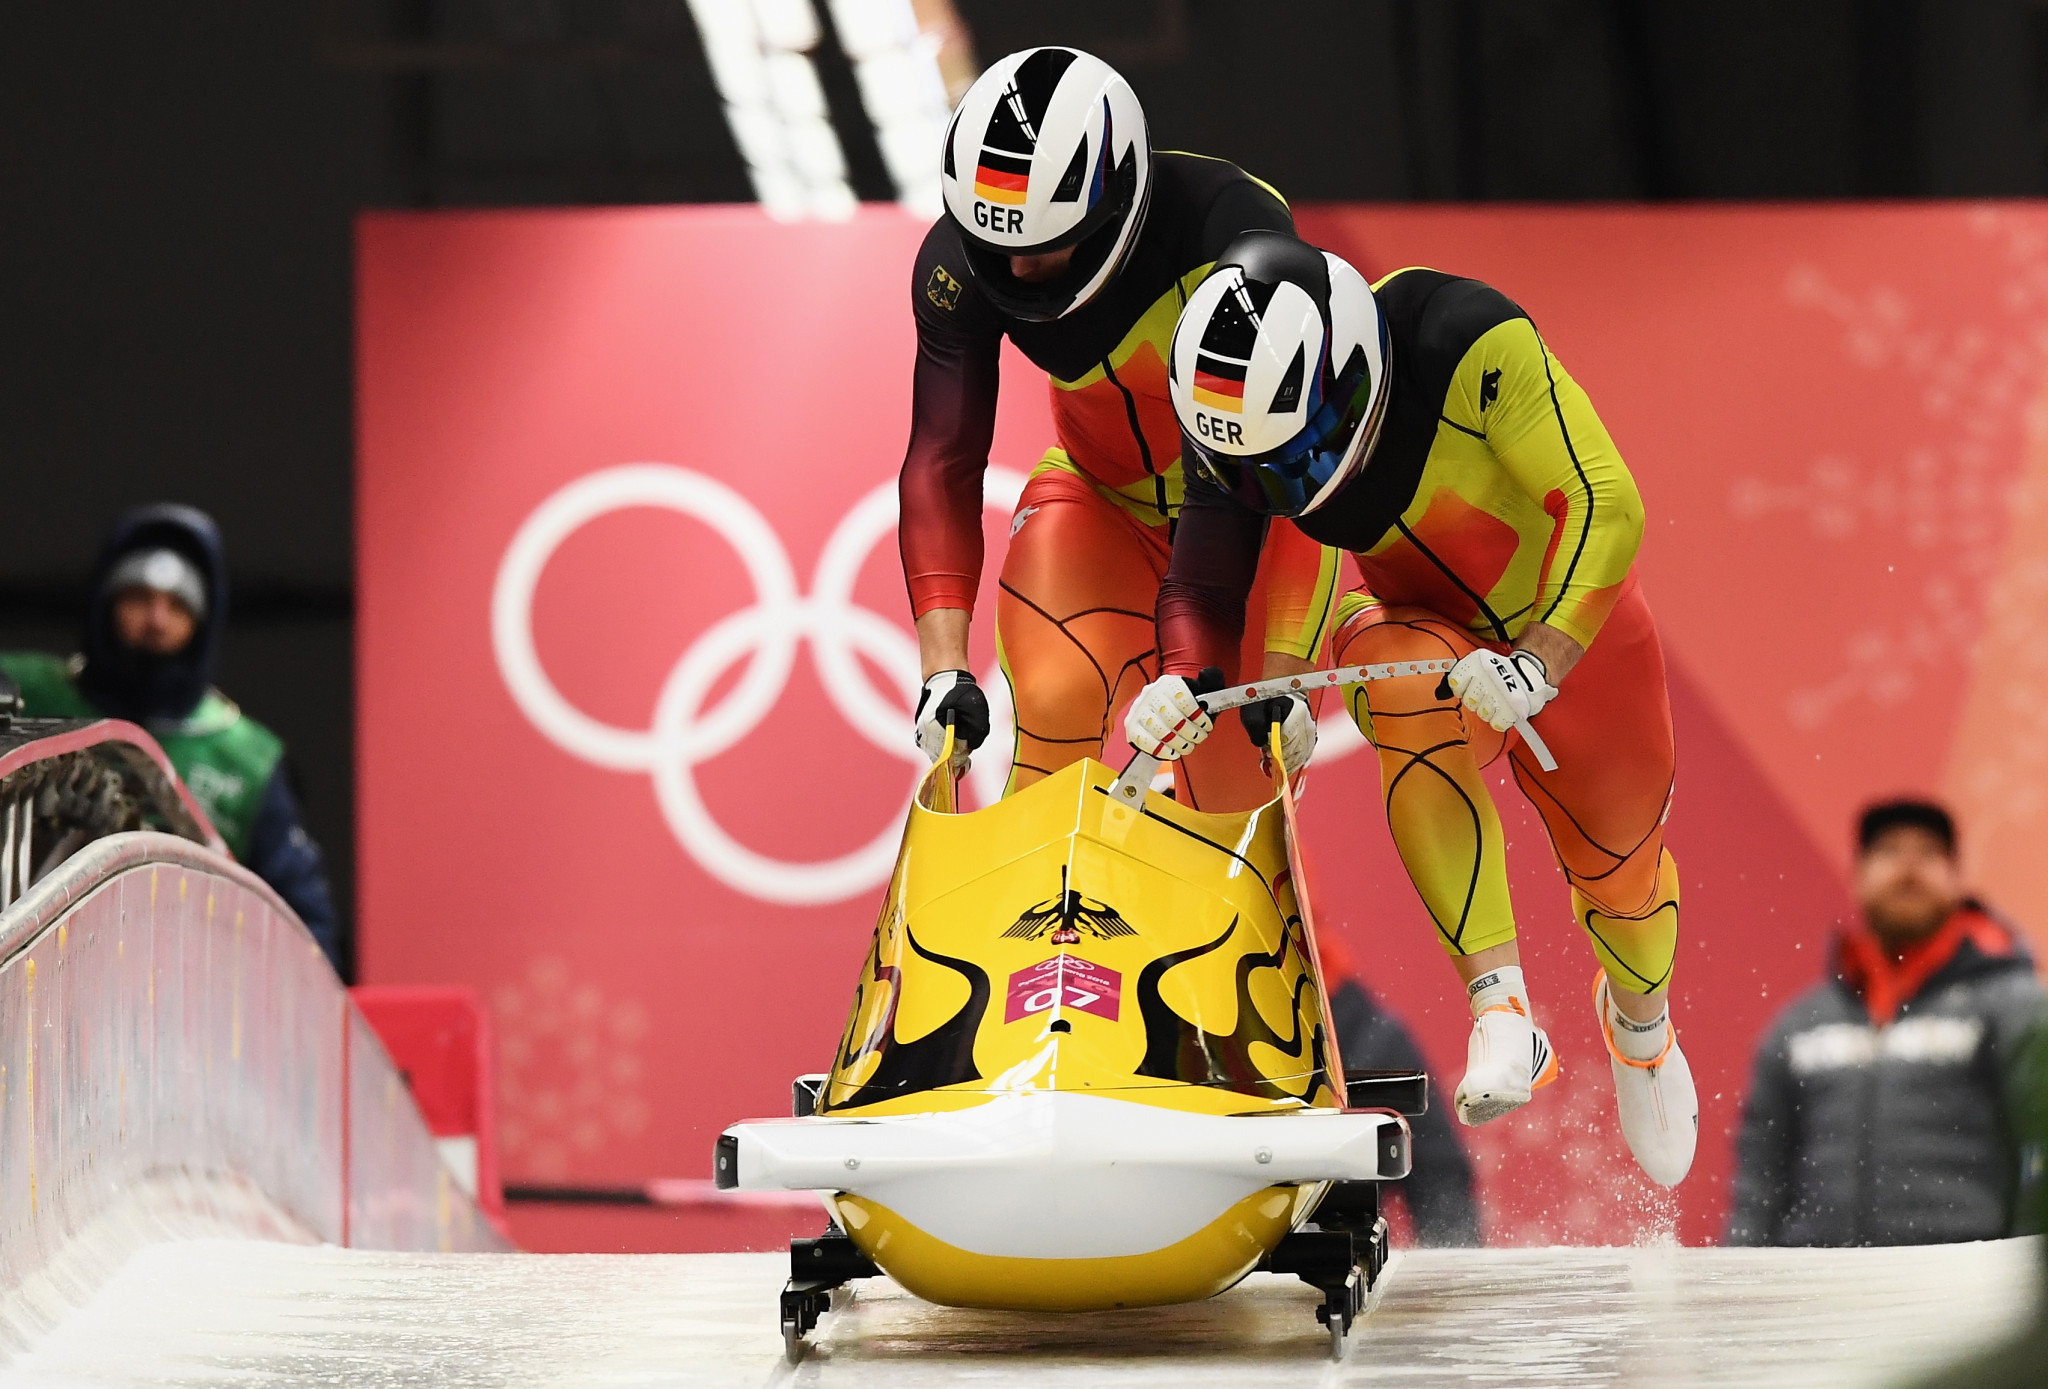 BMW creating two-man bobsleigh prototype for German teams